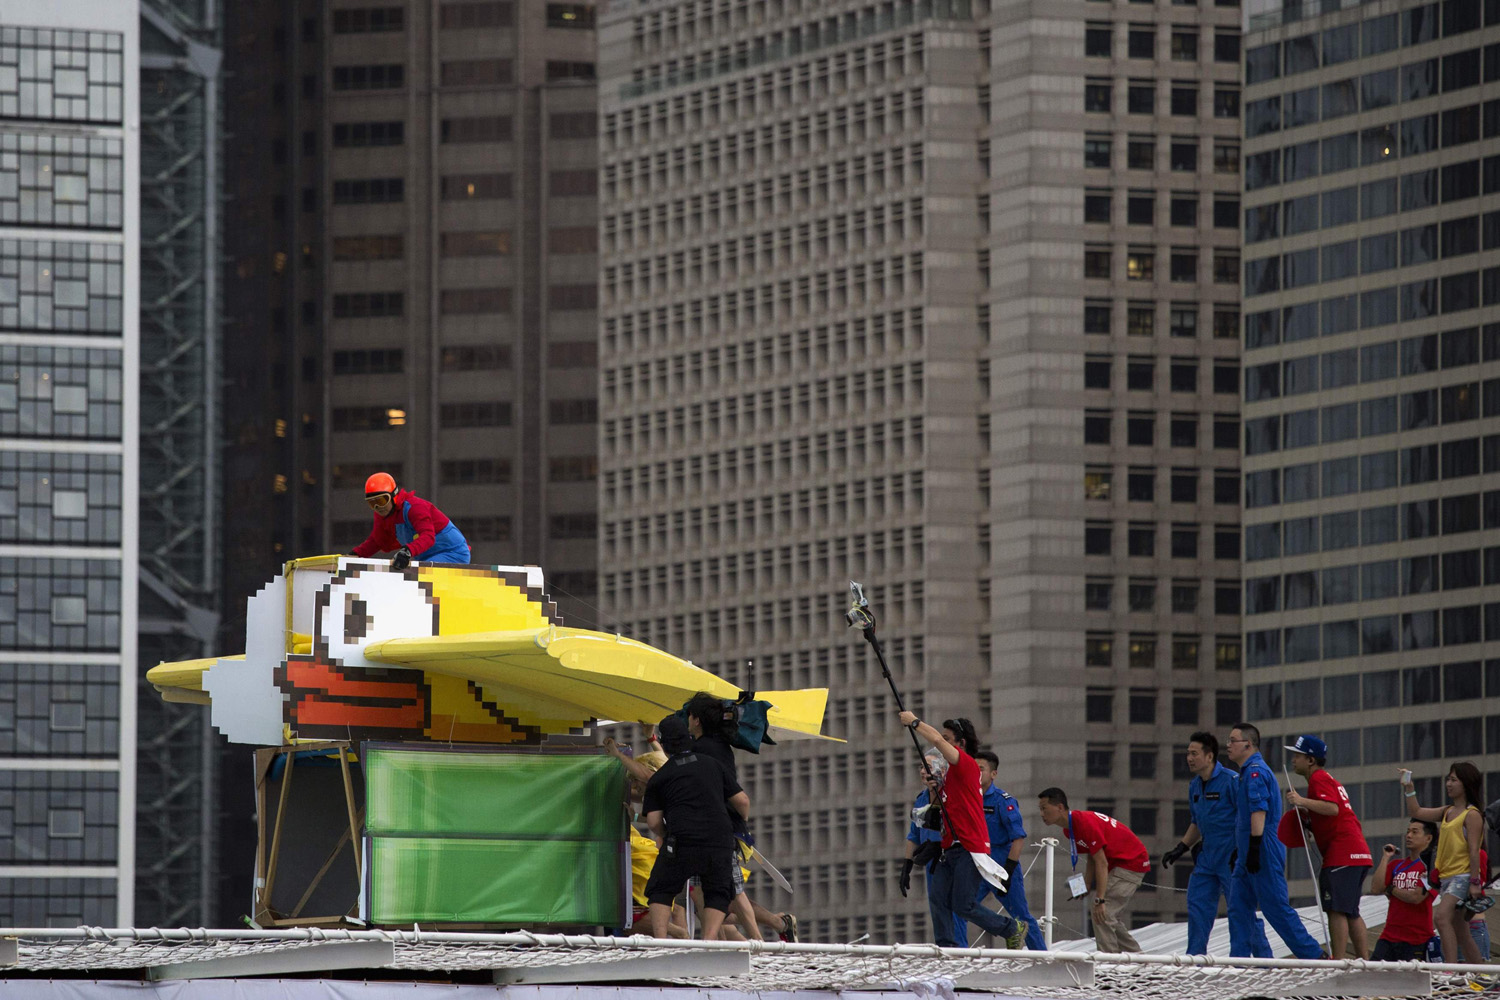 A participant operates the "Flappy Bird", a self-made flying machine, during the Red Bull Flugtag event at Hong Kong's financial Central district May 11, 2014.